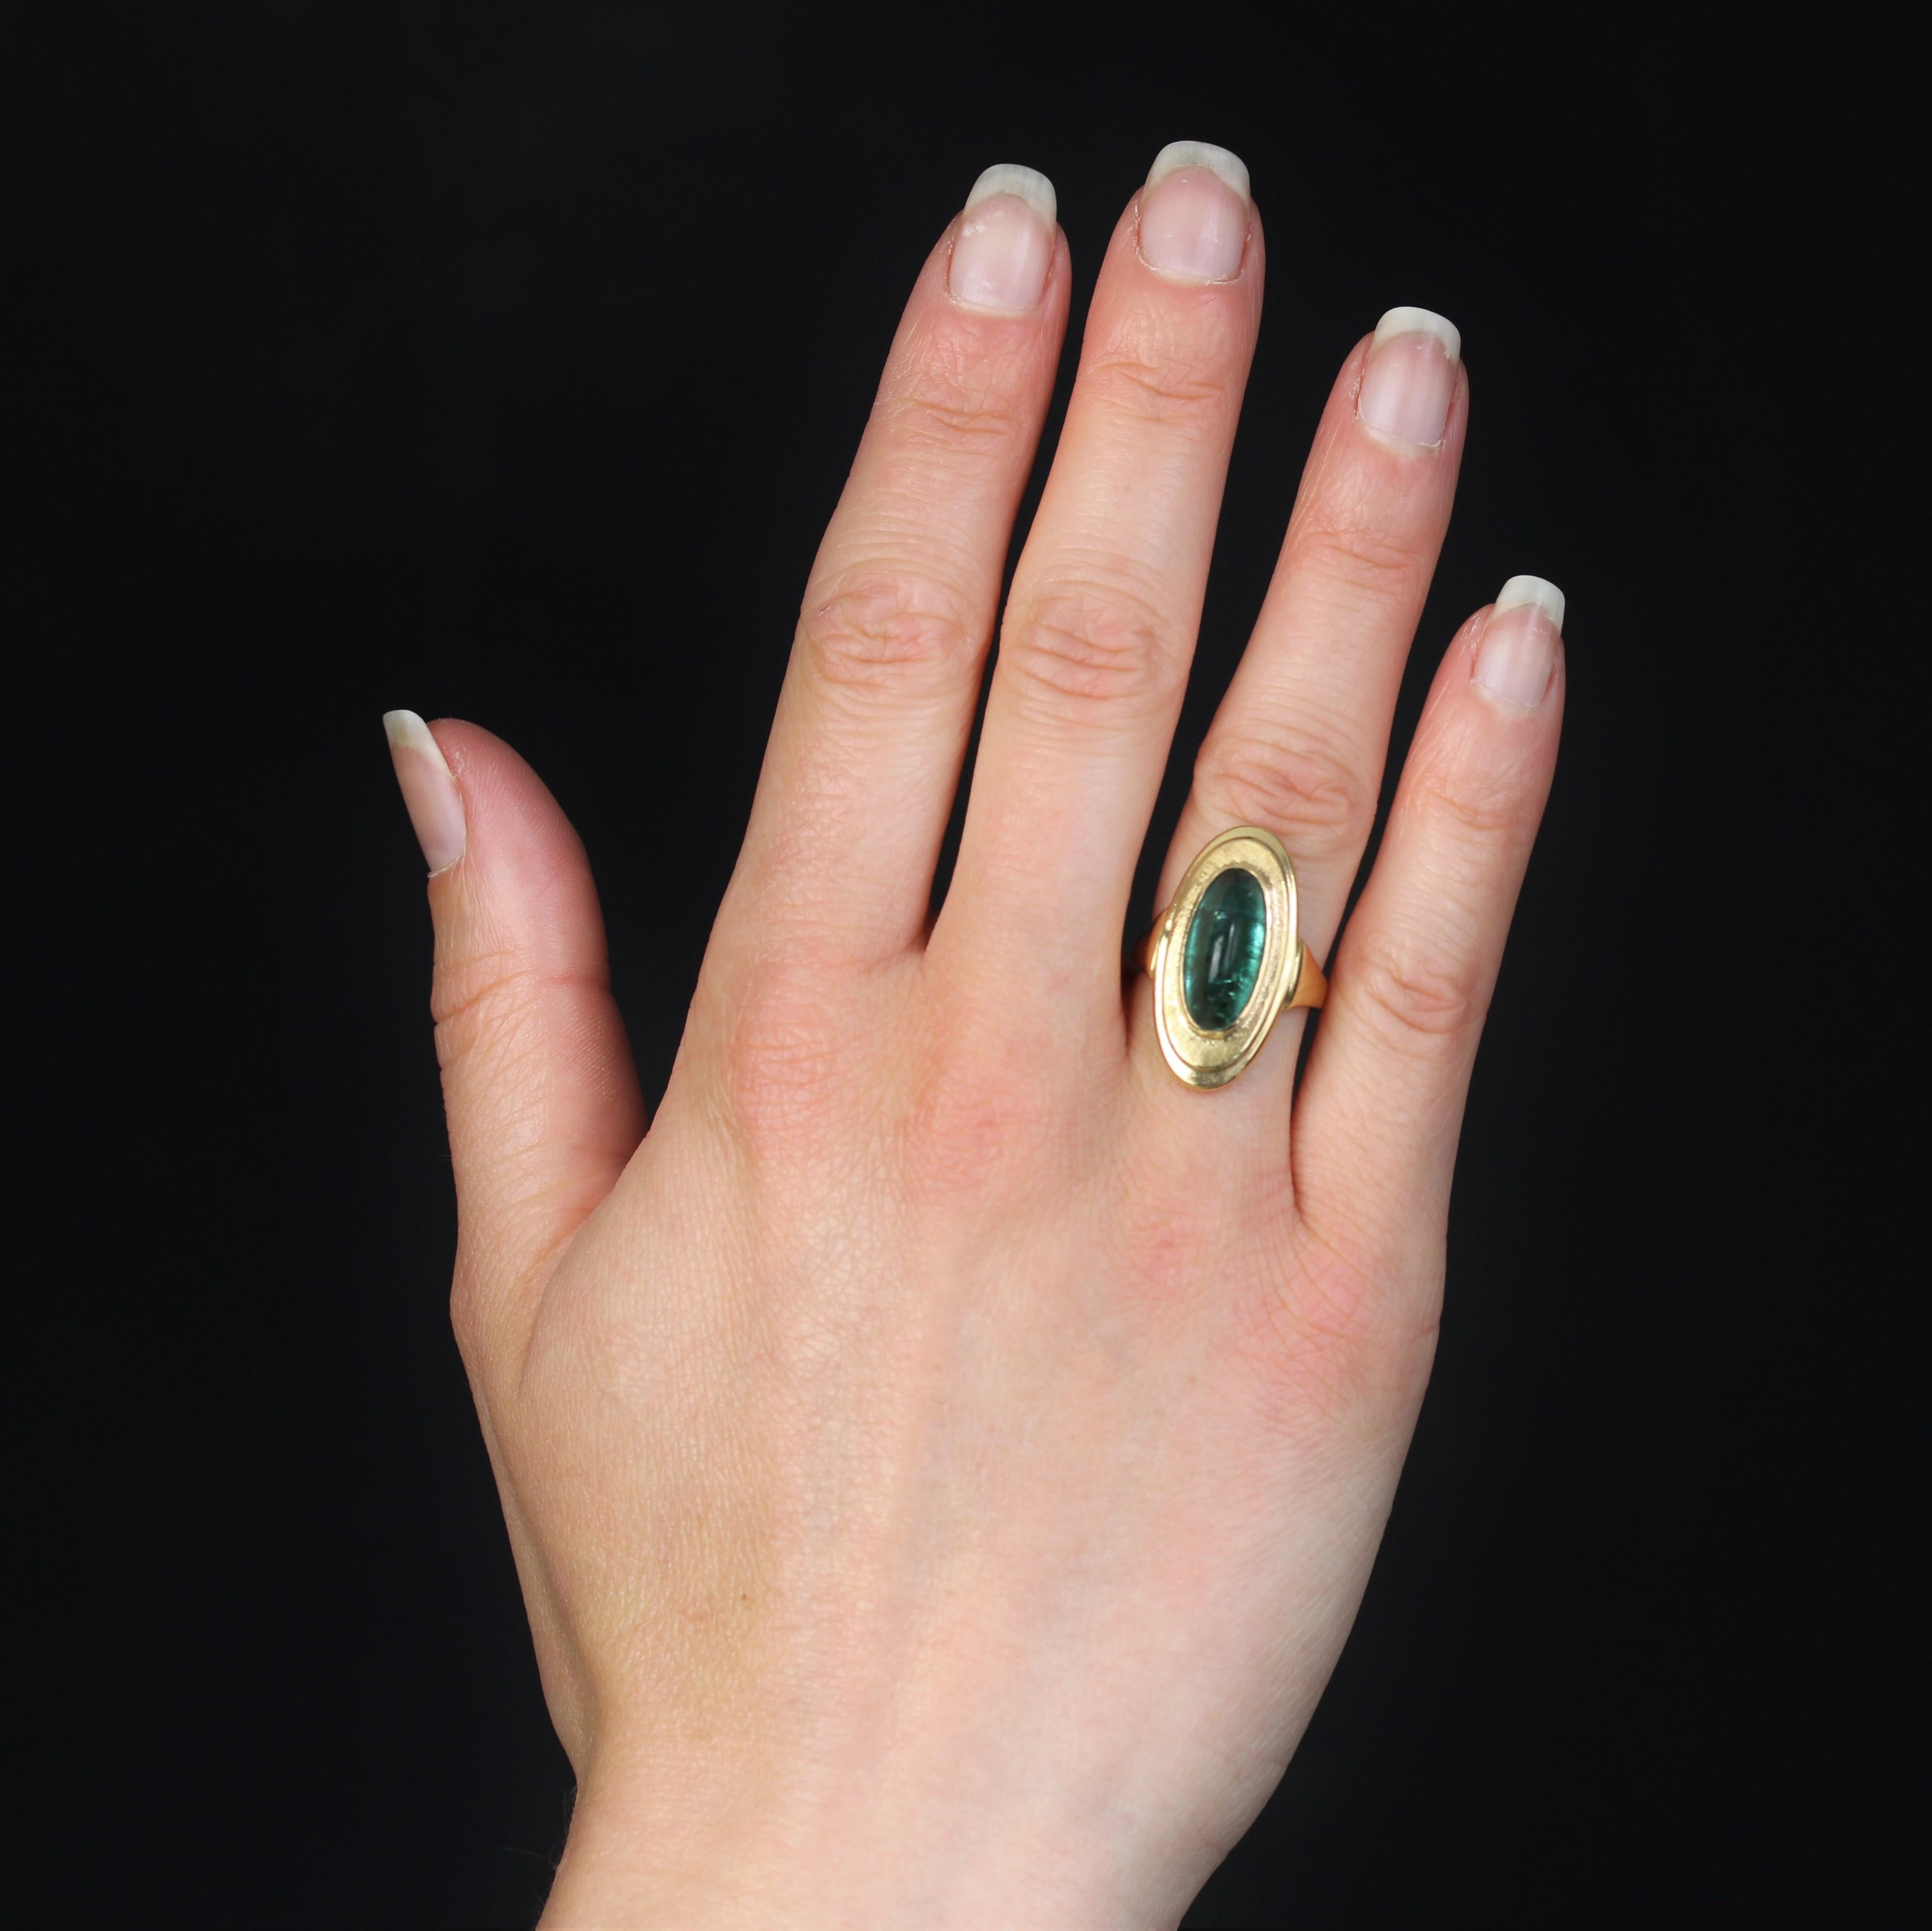 Ring in 18 karat yellow gold.
This slender, oval-shaped vintage ring in yellow gold features a central sugarloaf cut green tourmaline. The surround is chased. The departures of the ring are fan-shaped and drop-shaped.
Total tourmaline weight : 4.60